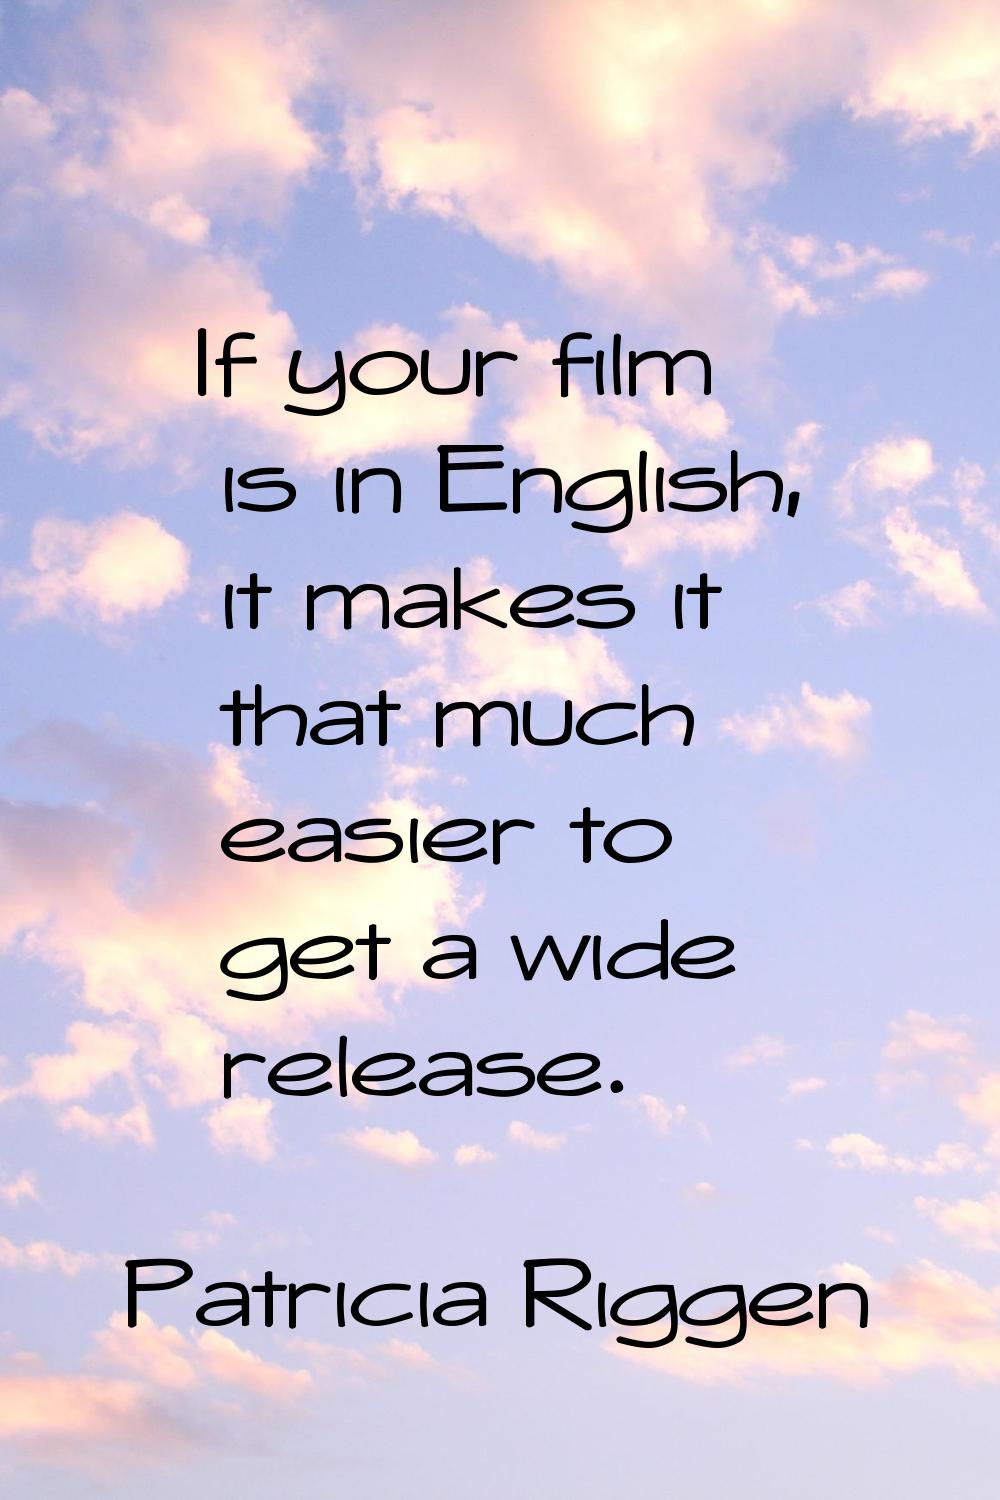 If your film is in English, it makes it that much easier to get a wide release.